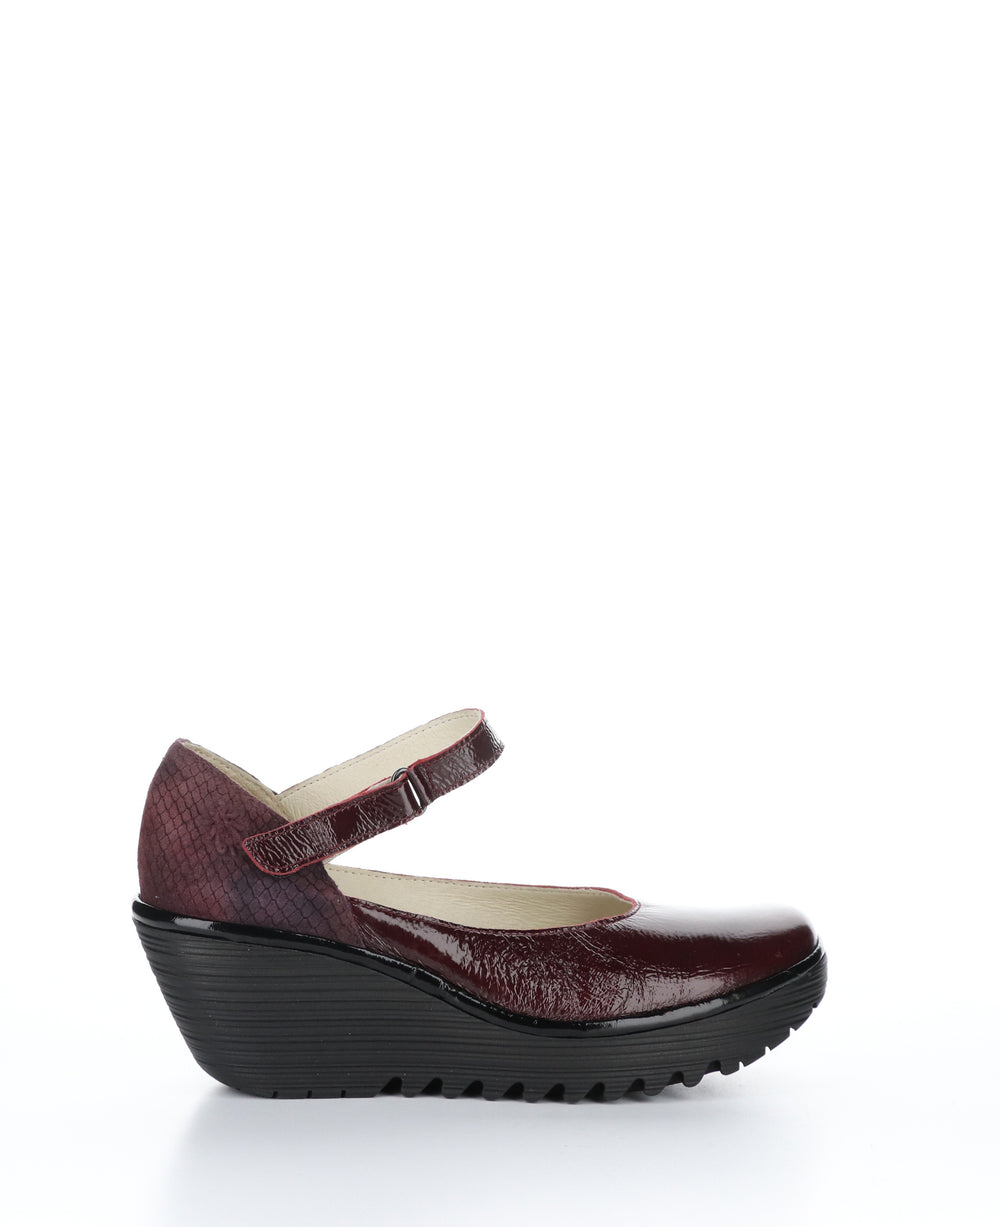 YAWO345FLY Cordoba Red/Wine Round Toe Shoes|YAWO345FLY Chaussures à Bout Rond in Rouge